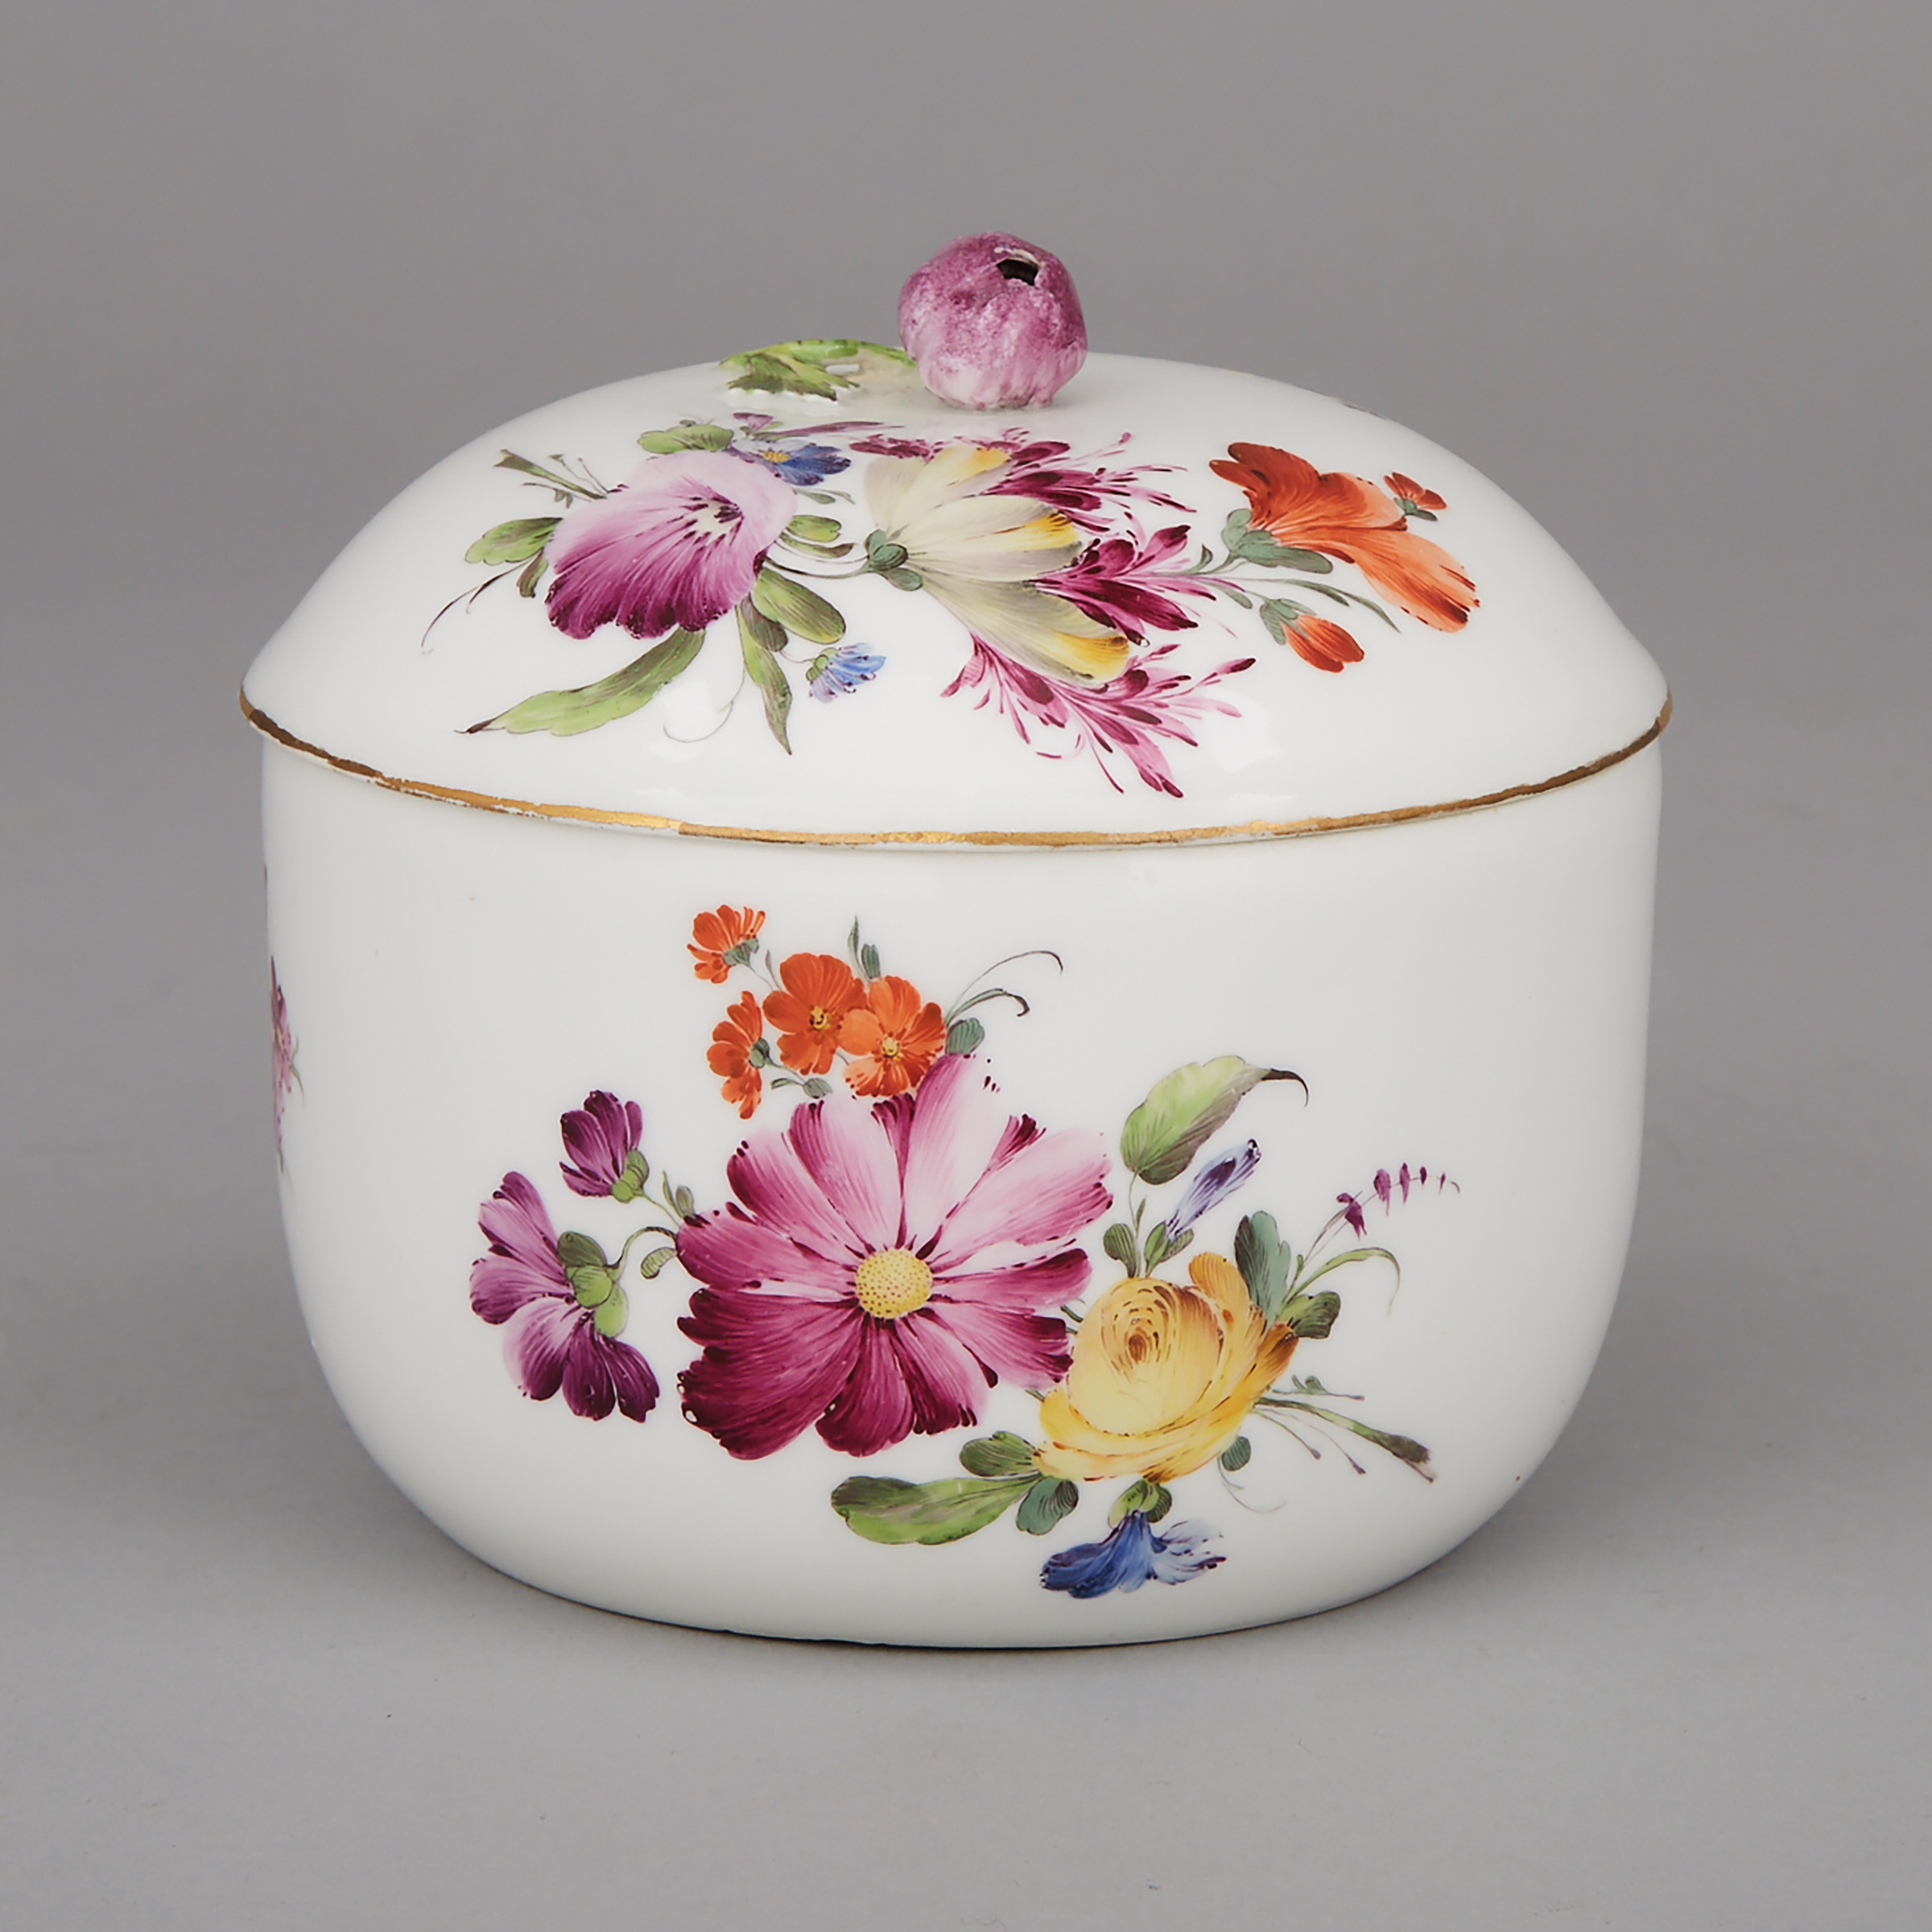 The Hague-Decorated Covered Sugar Bowl, c.1775-80